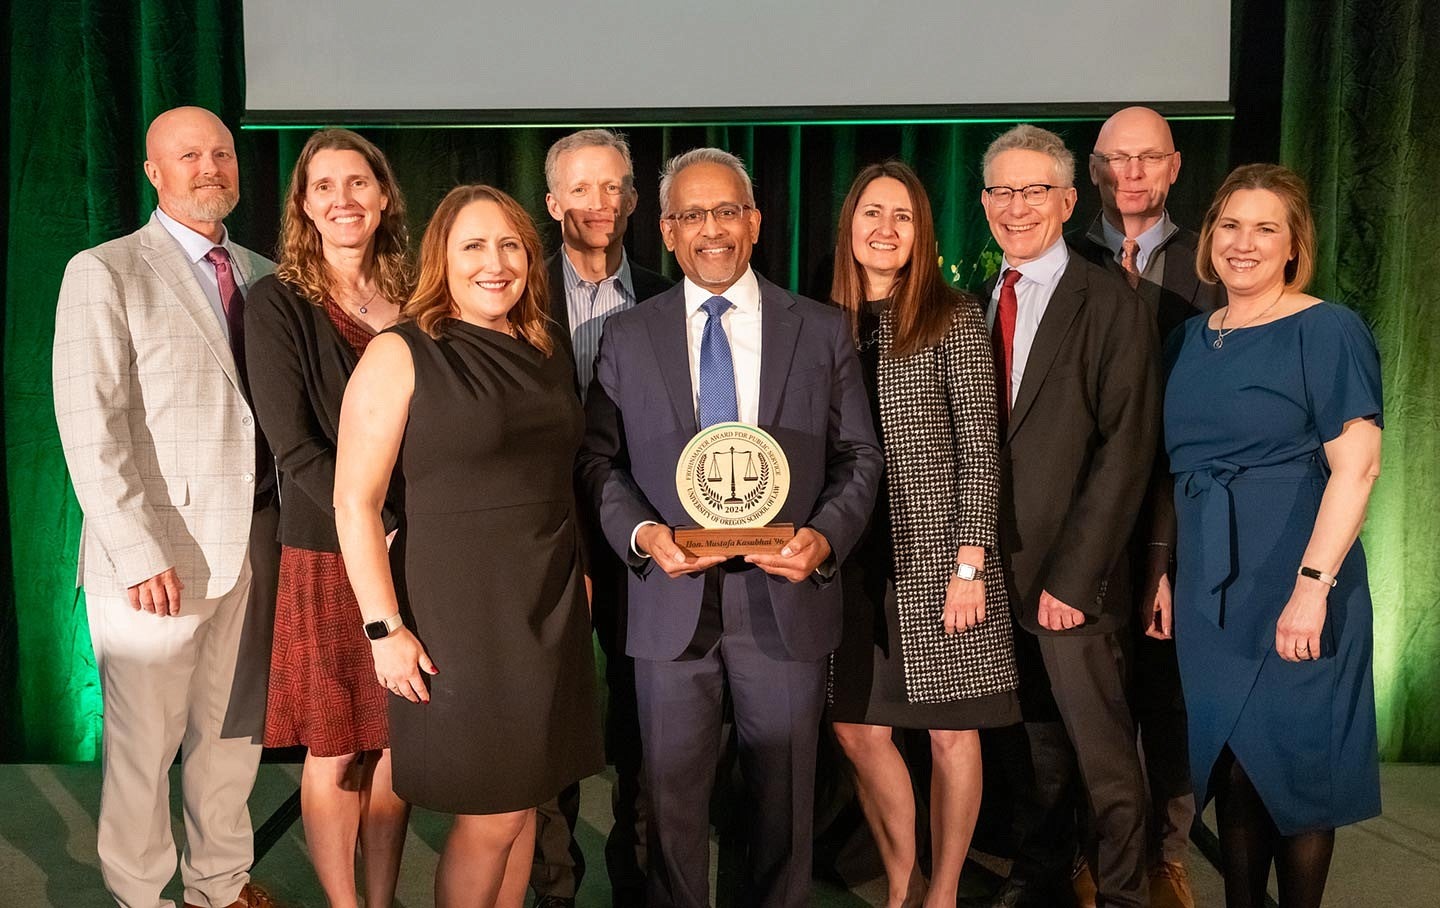 The University of Oregon School of Law class of 1996 posing with Judge Mustafa T. Kasubhai in the center holding the Frohnmayer award in front of a green curtain.